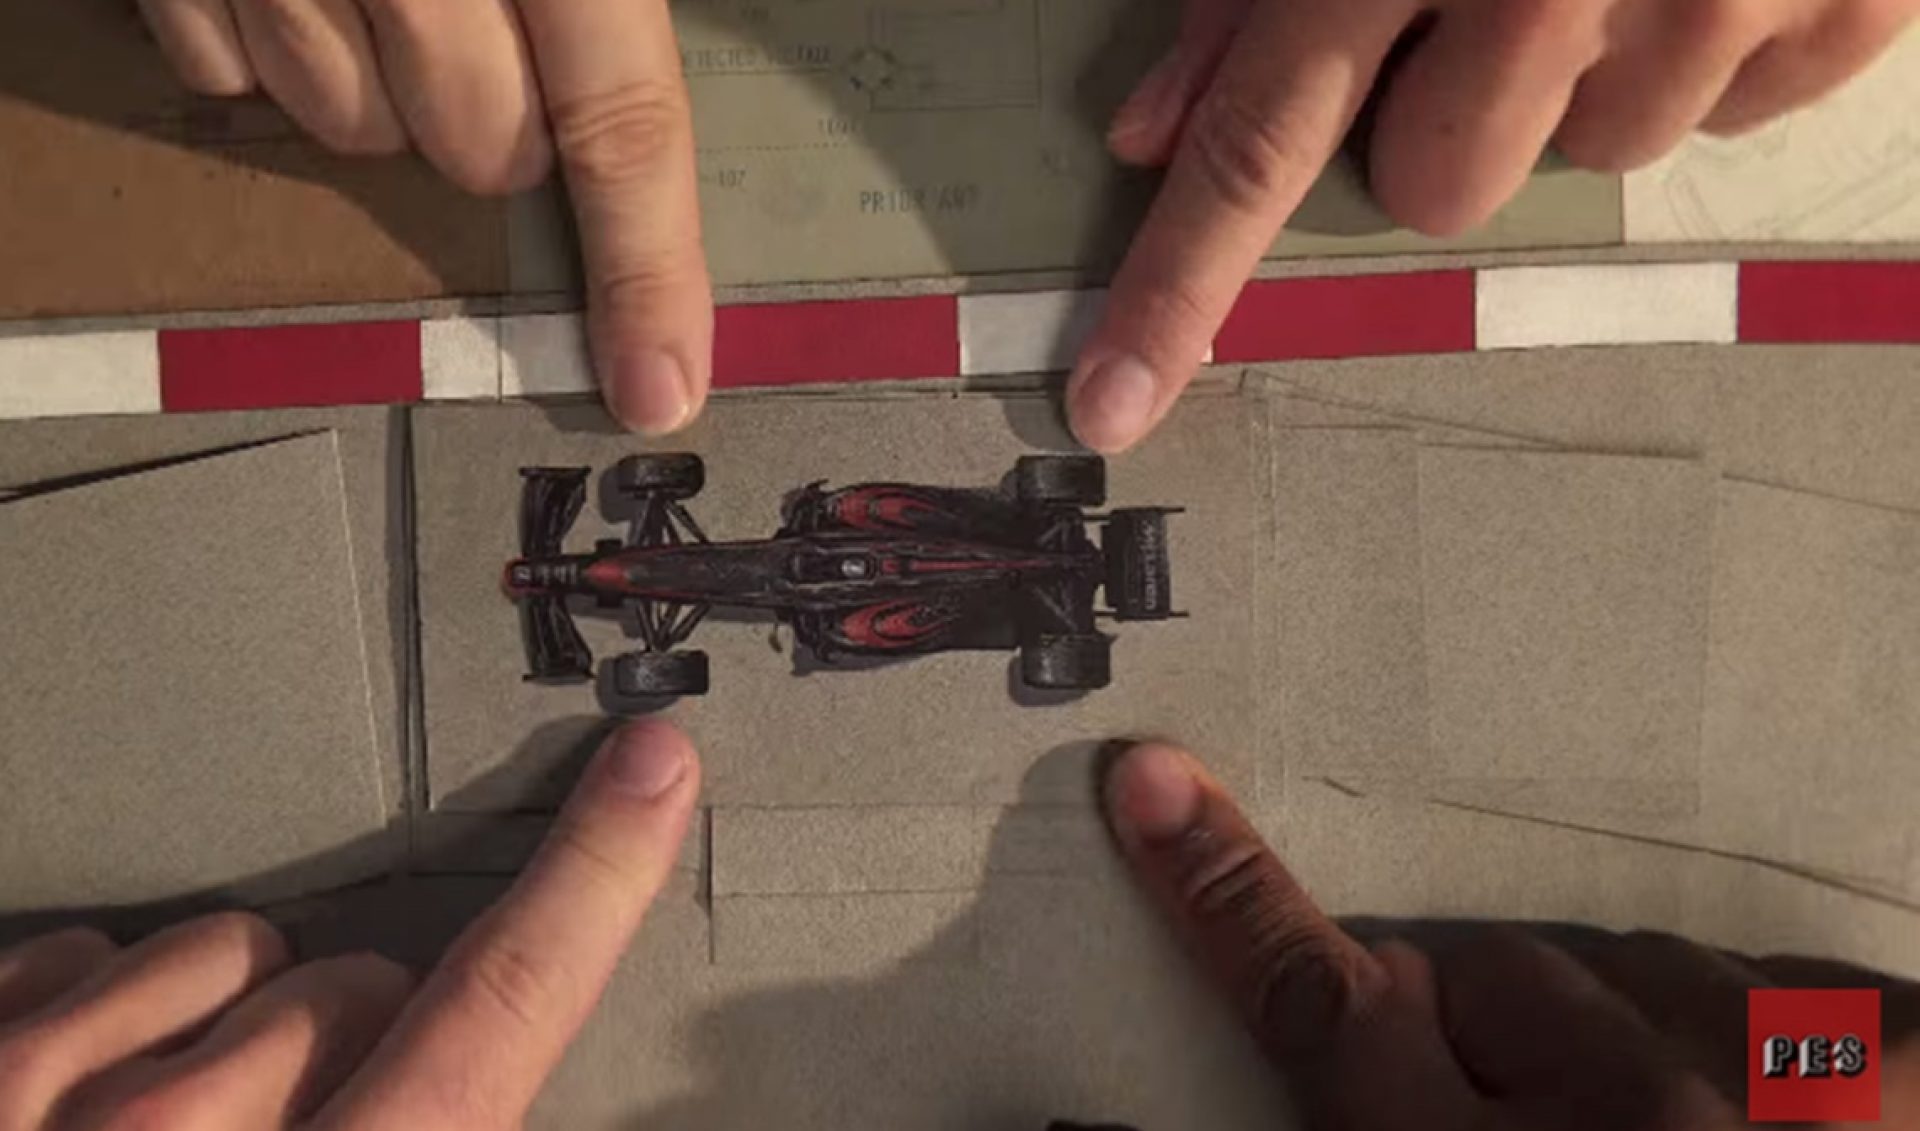 Stop-Motion Animator (And Academy Award Nominee) PES Directs Branded Video For Honda